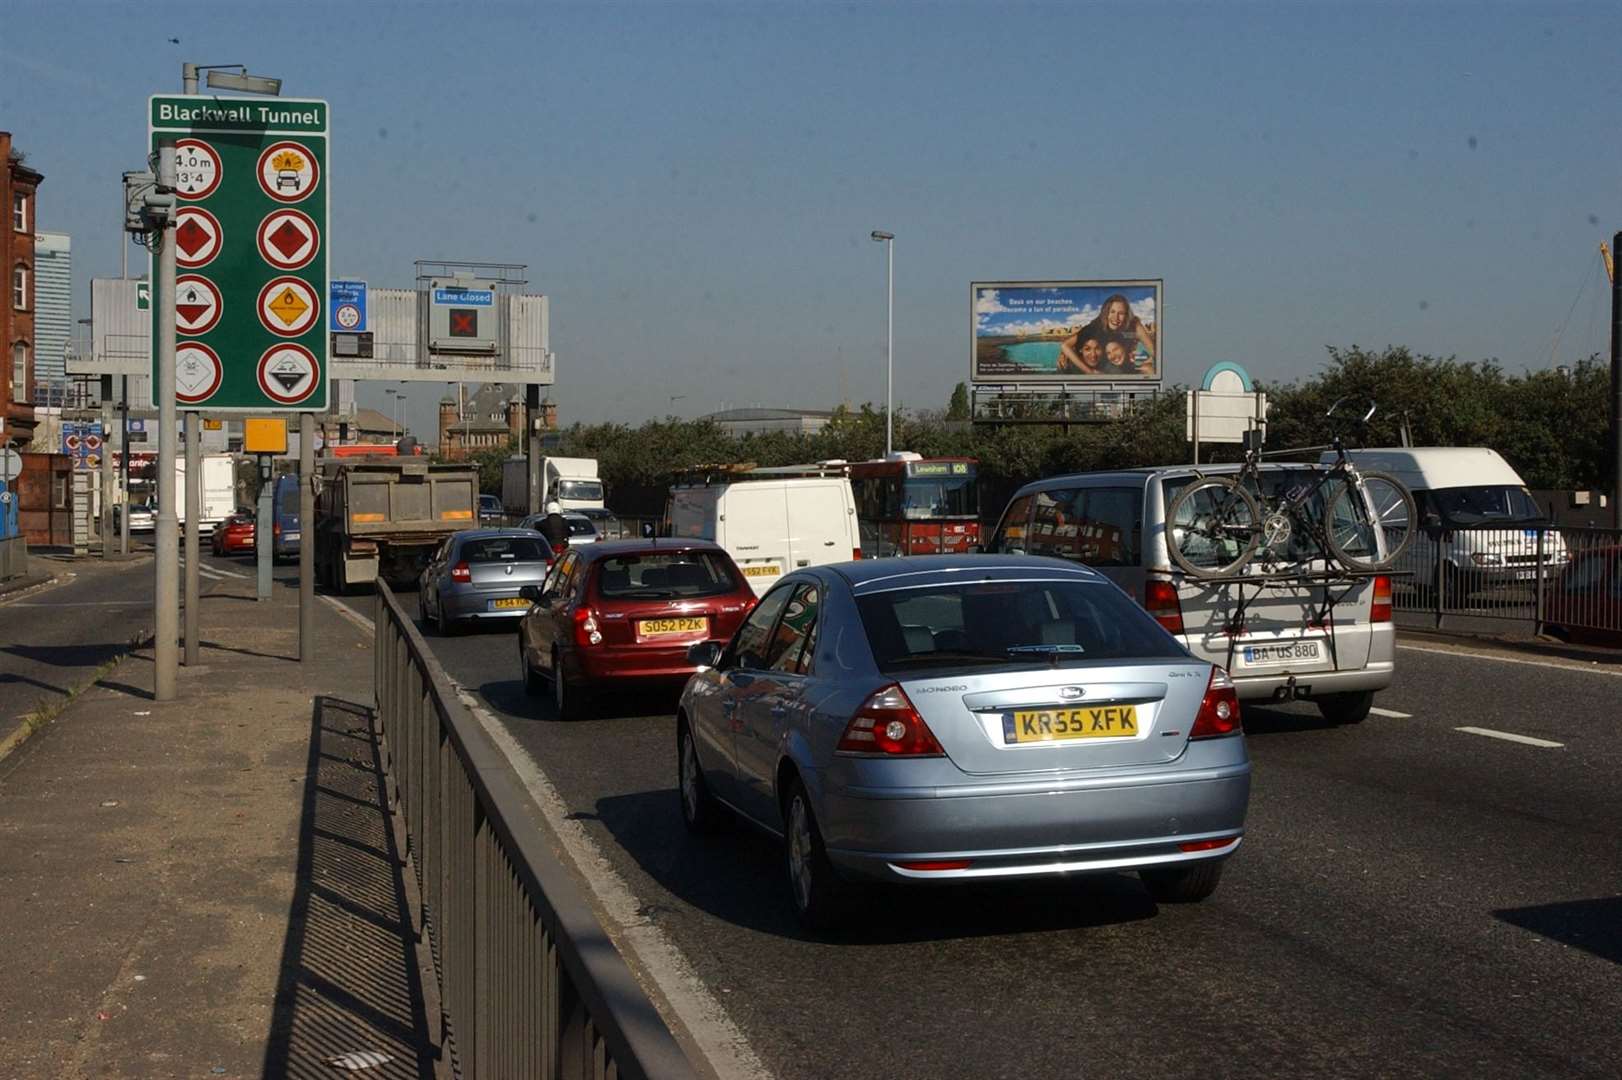 Drivers will pay to use the Blackwall Tunnel from 2025